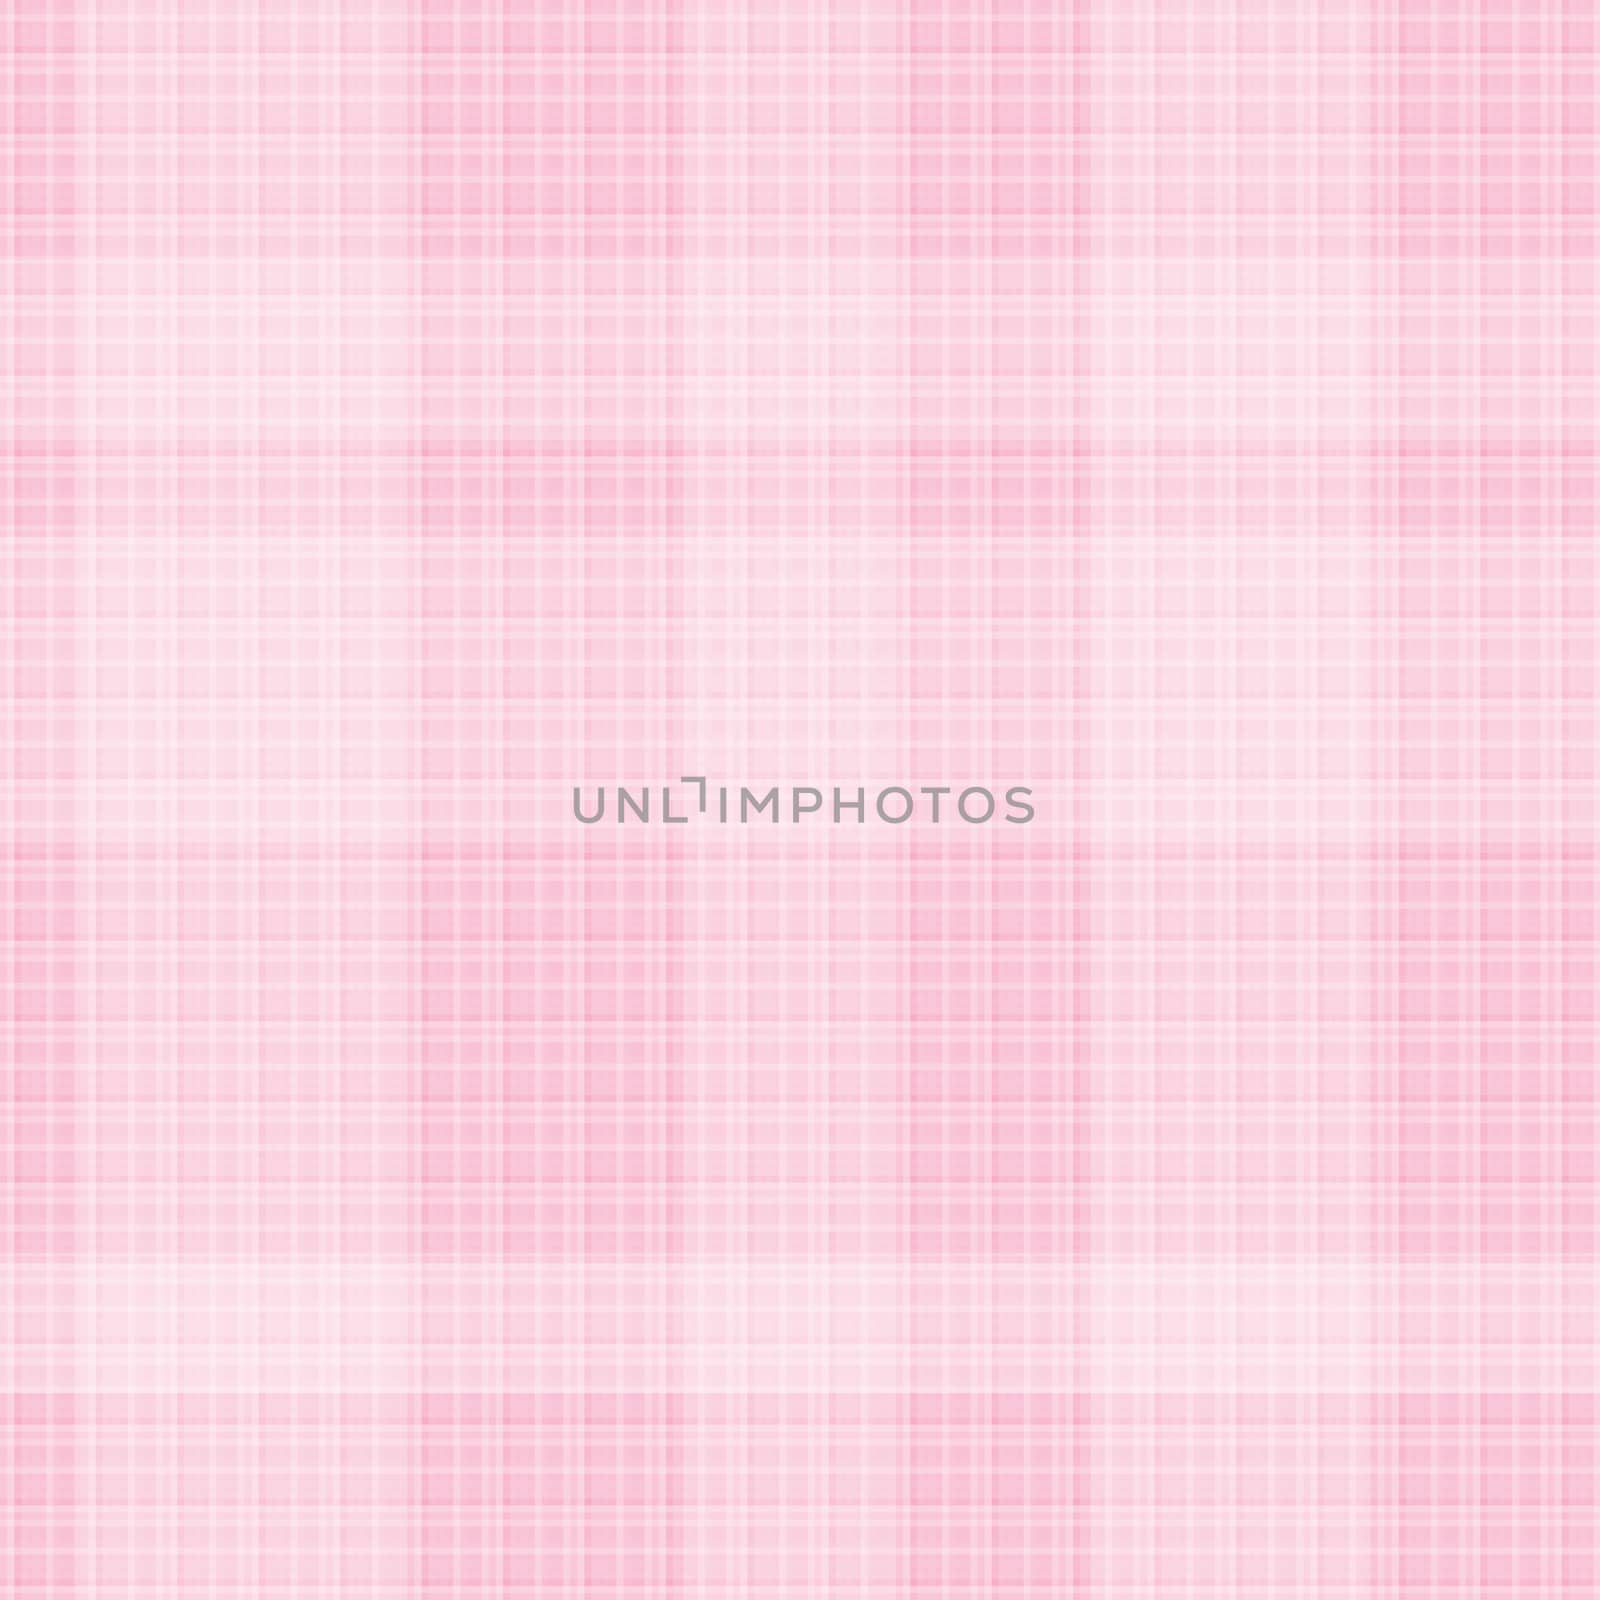 abstract bars picnic tablecloth background, beautiful banner wallpaper design illustration